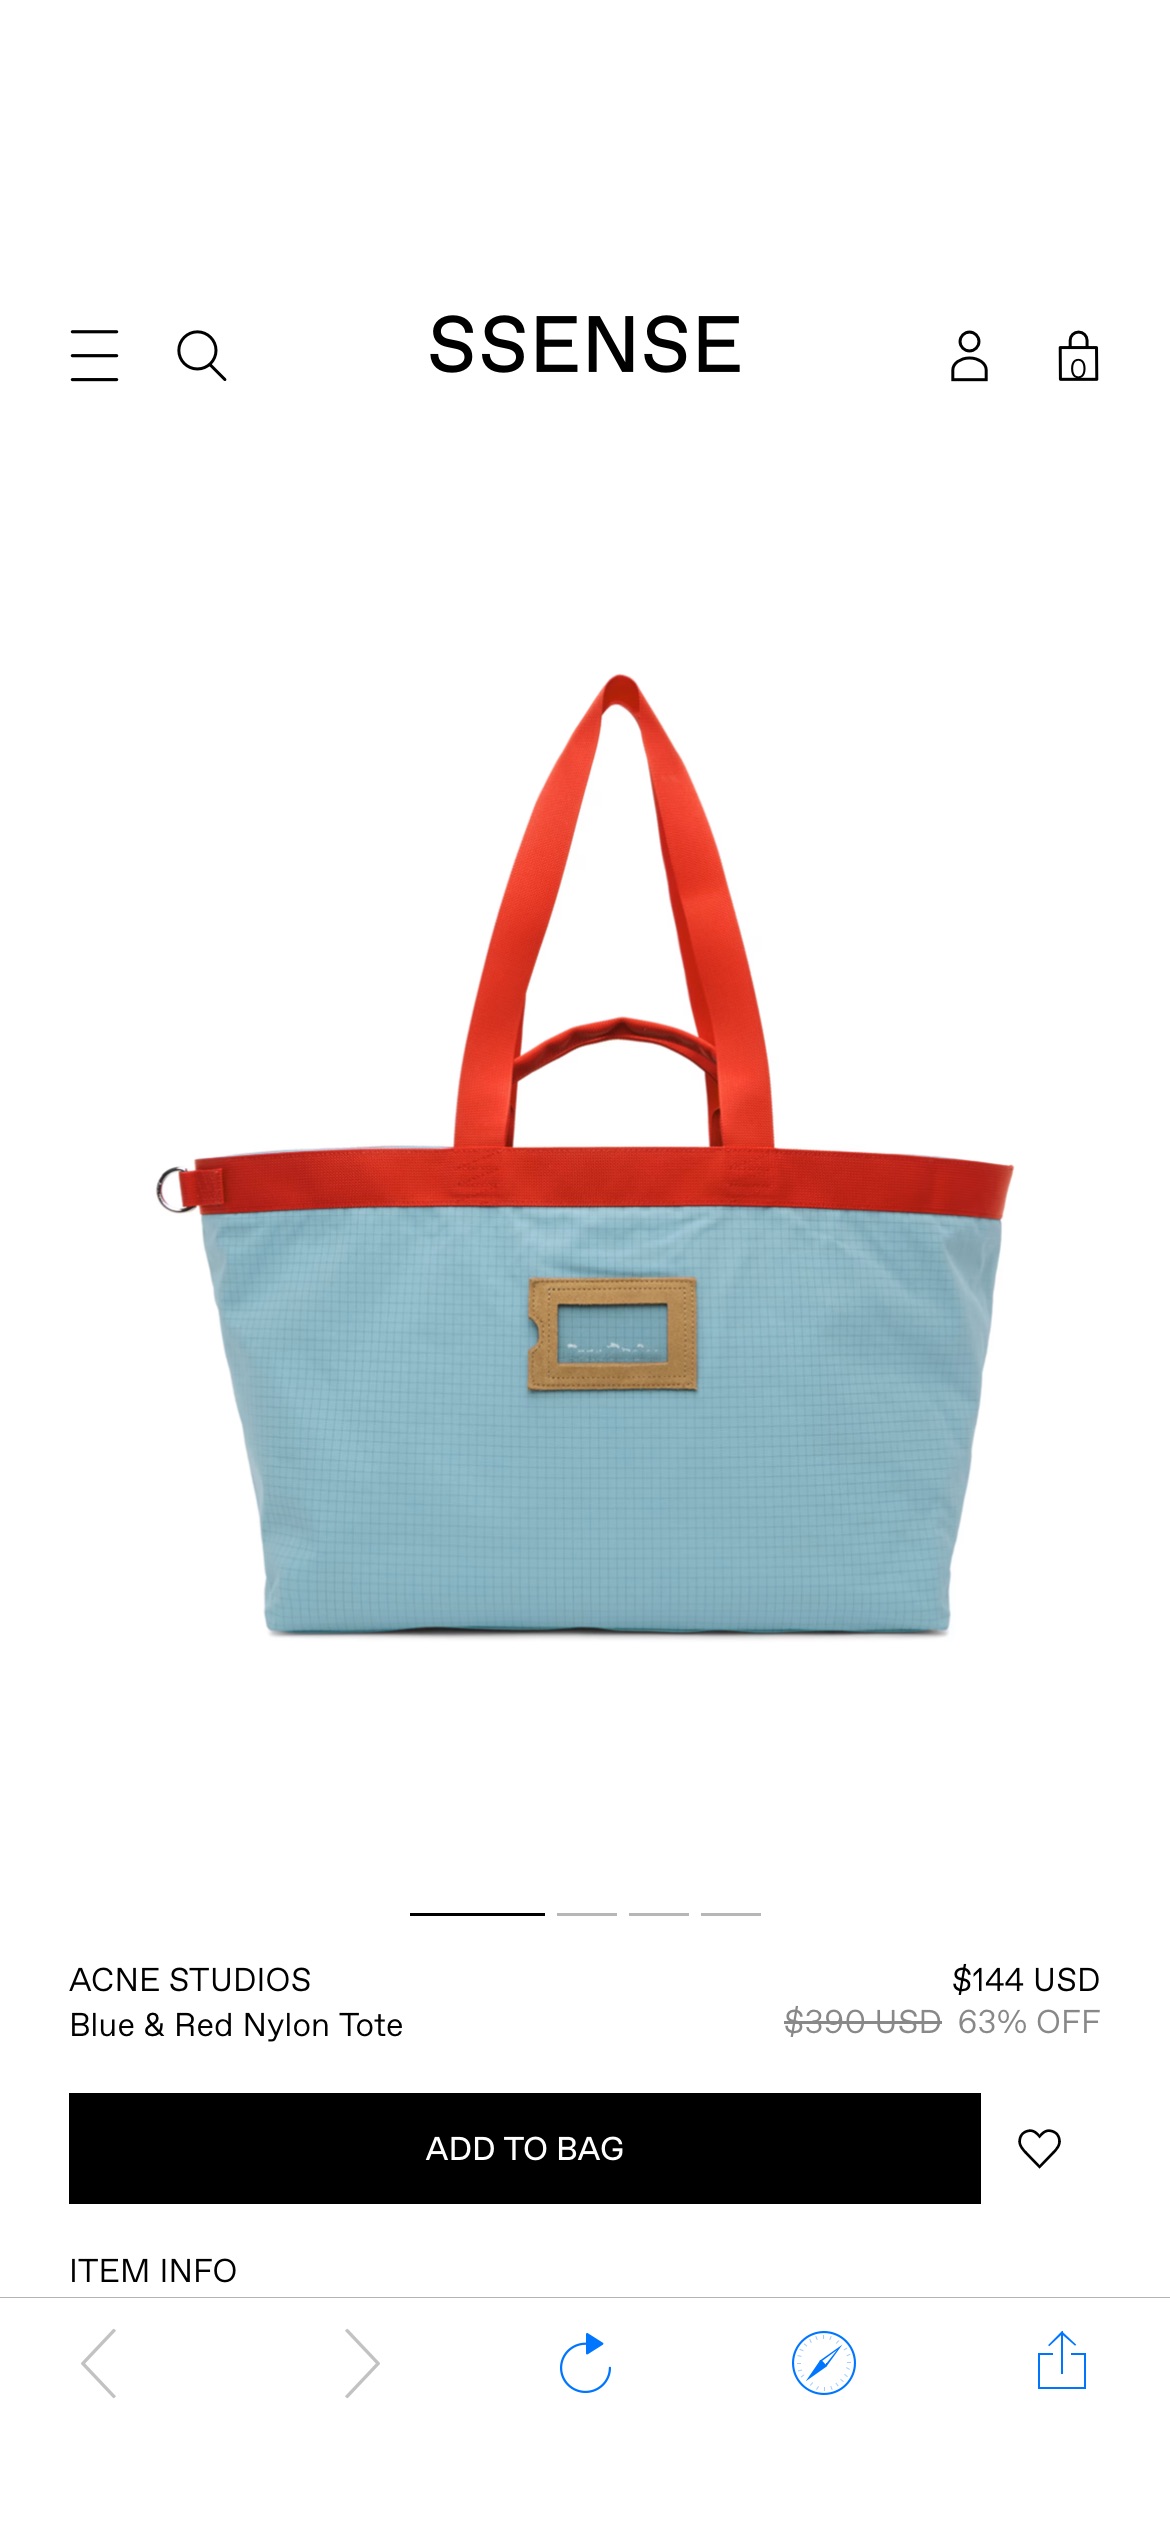 Blue & Red Nylon Tote by Acne Studios on Sale